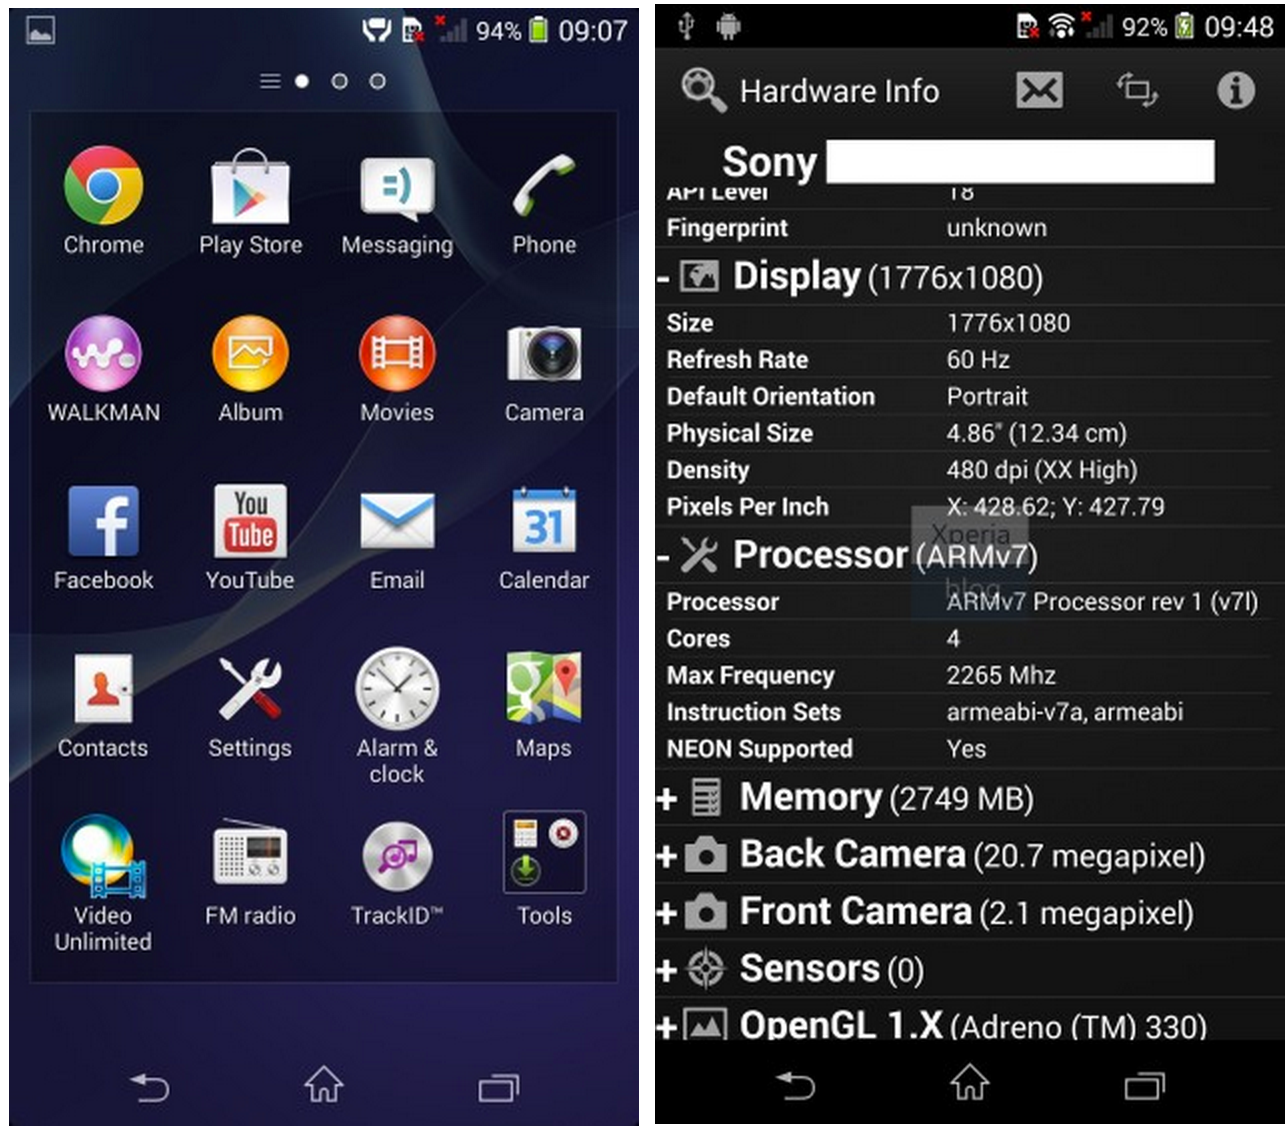 sony xperia z2 specs get further confirmation 5 2 inch display 20 7mp camera image 2